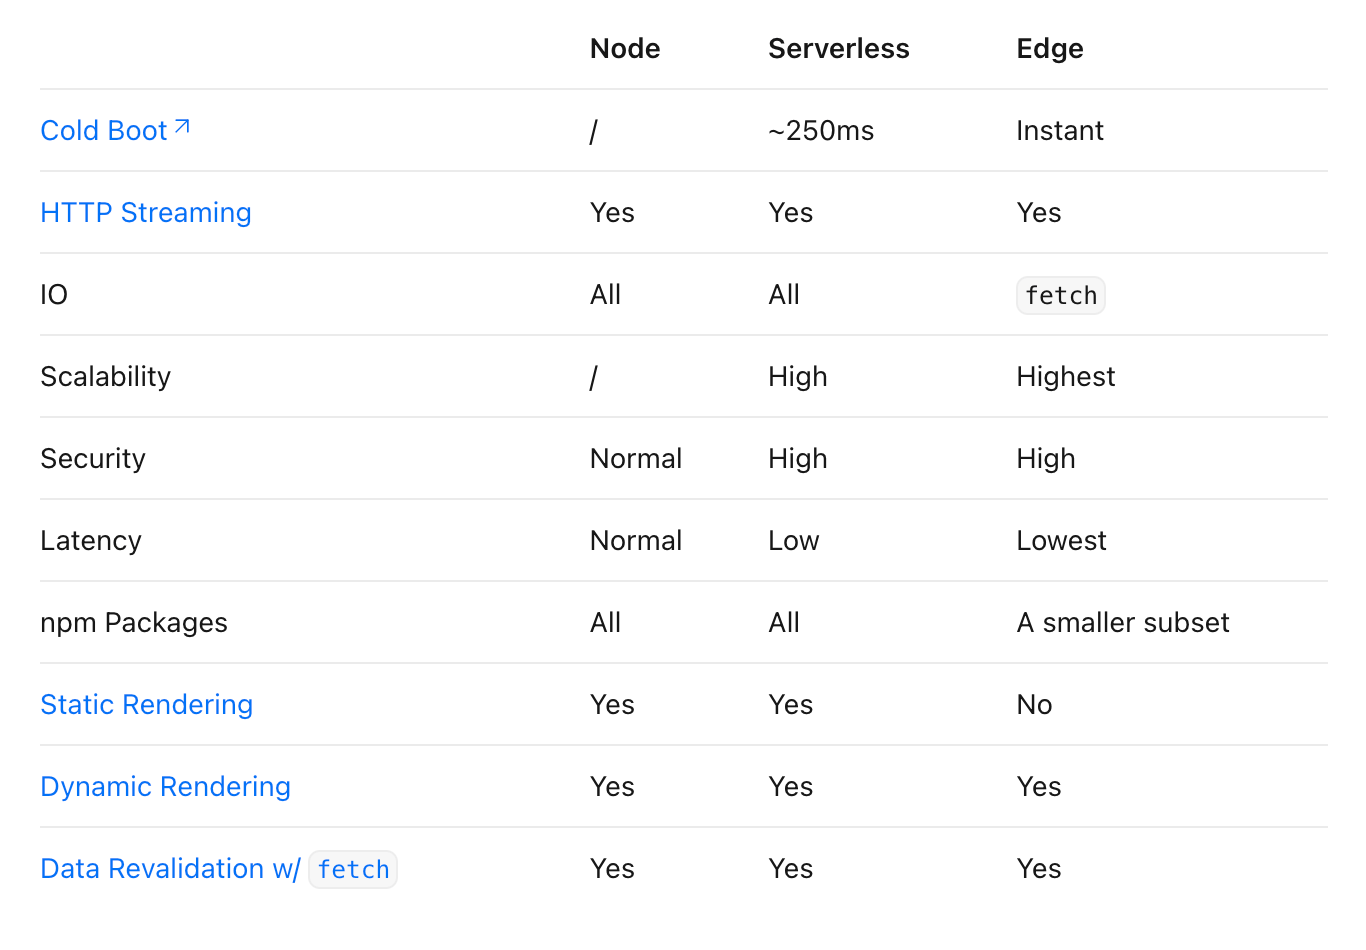 Next.js table comparing node, serverless and edge runtimes